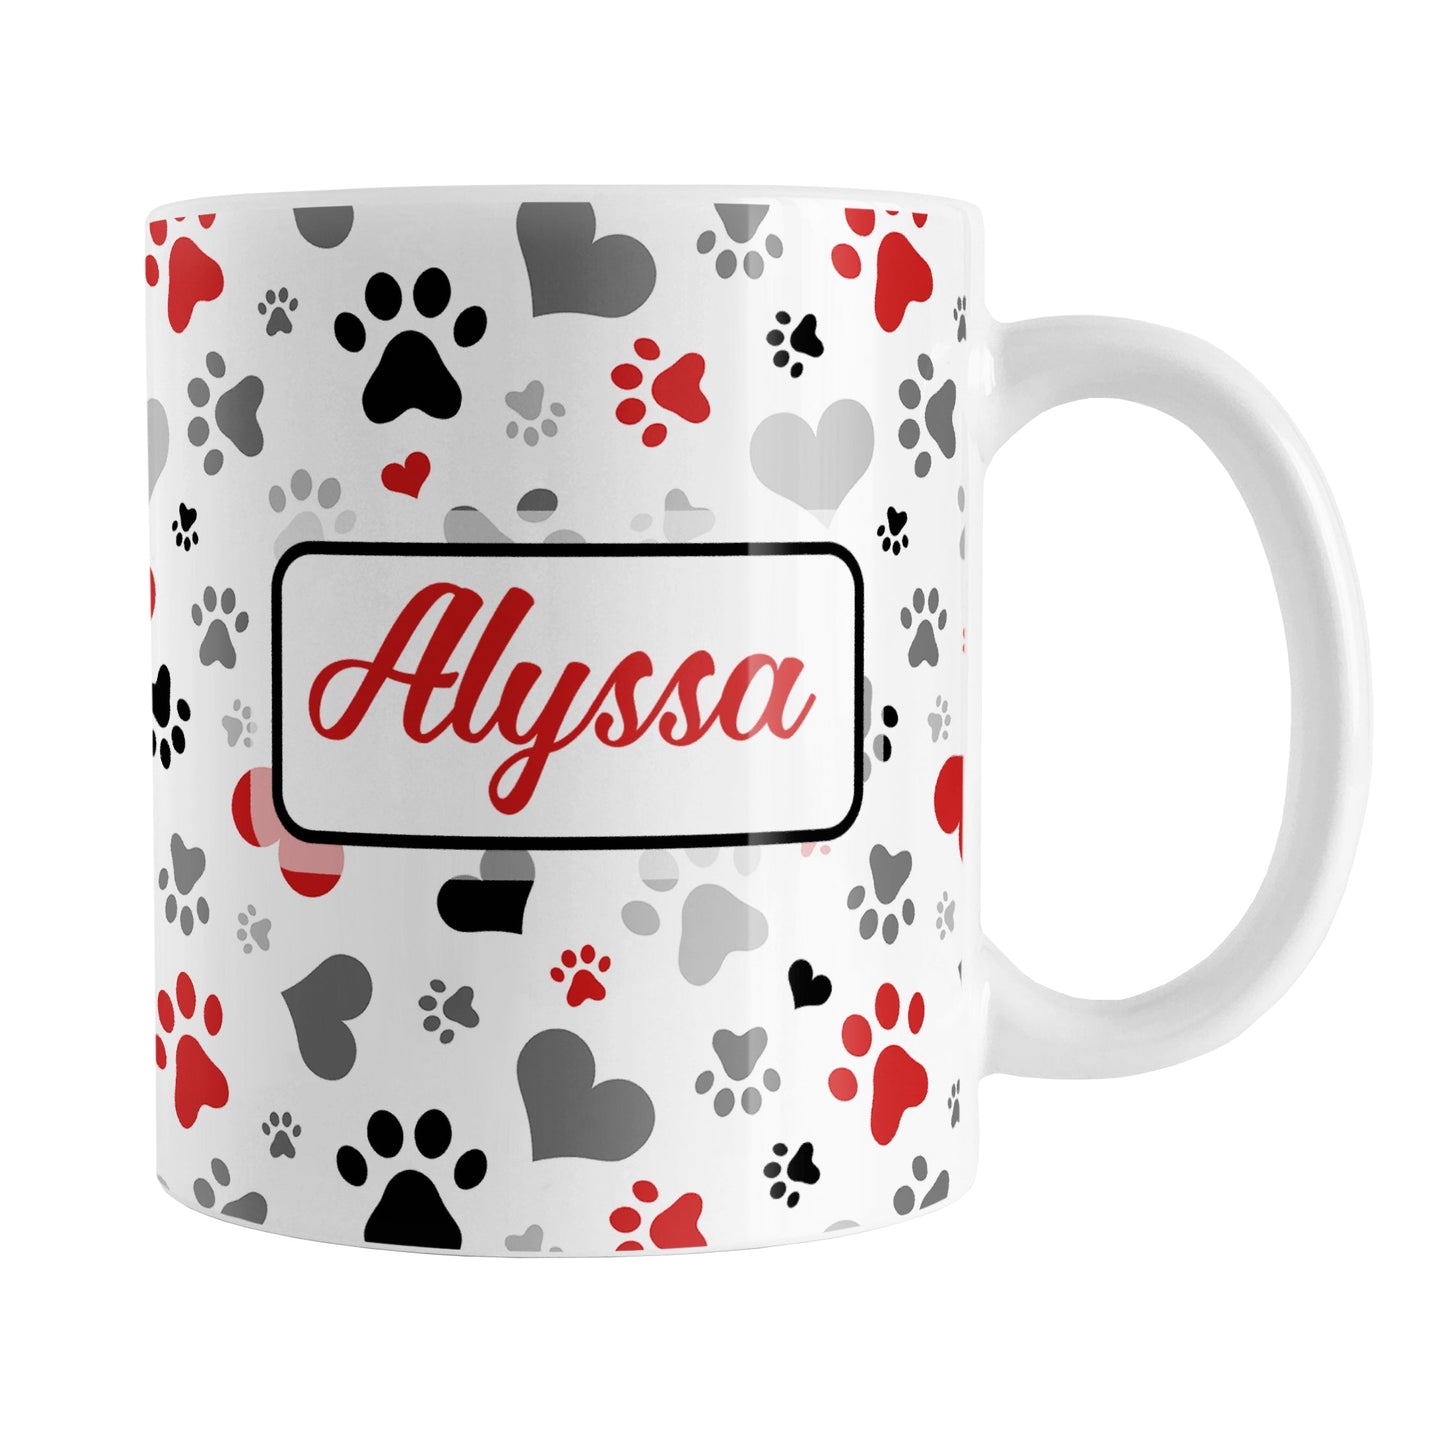 Personalized Black and Red Hearts and Paw Prints Mug (11oz) at Amy's Coffee Mugs. A ceramic coffee mug designed with a pattern of hearts and paw prints in red, black, and gray that wraps around the mug to the handle. Your name is custom printed in a red script font in a white rectangle on both sides of the mug over the paw prints pattern.